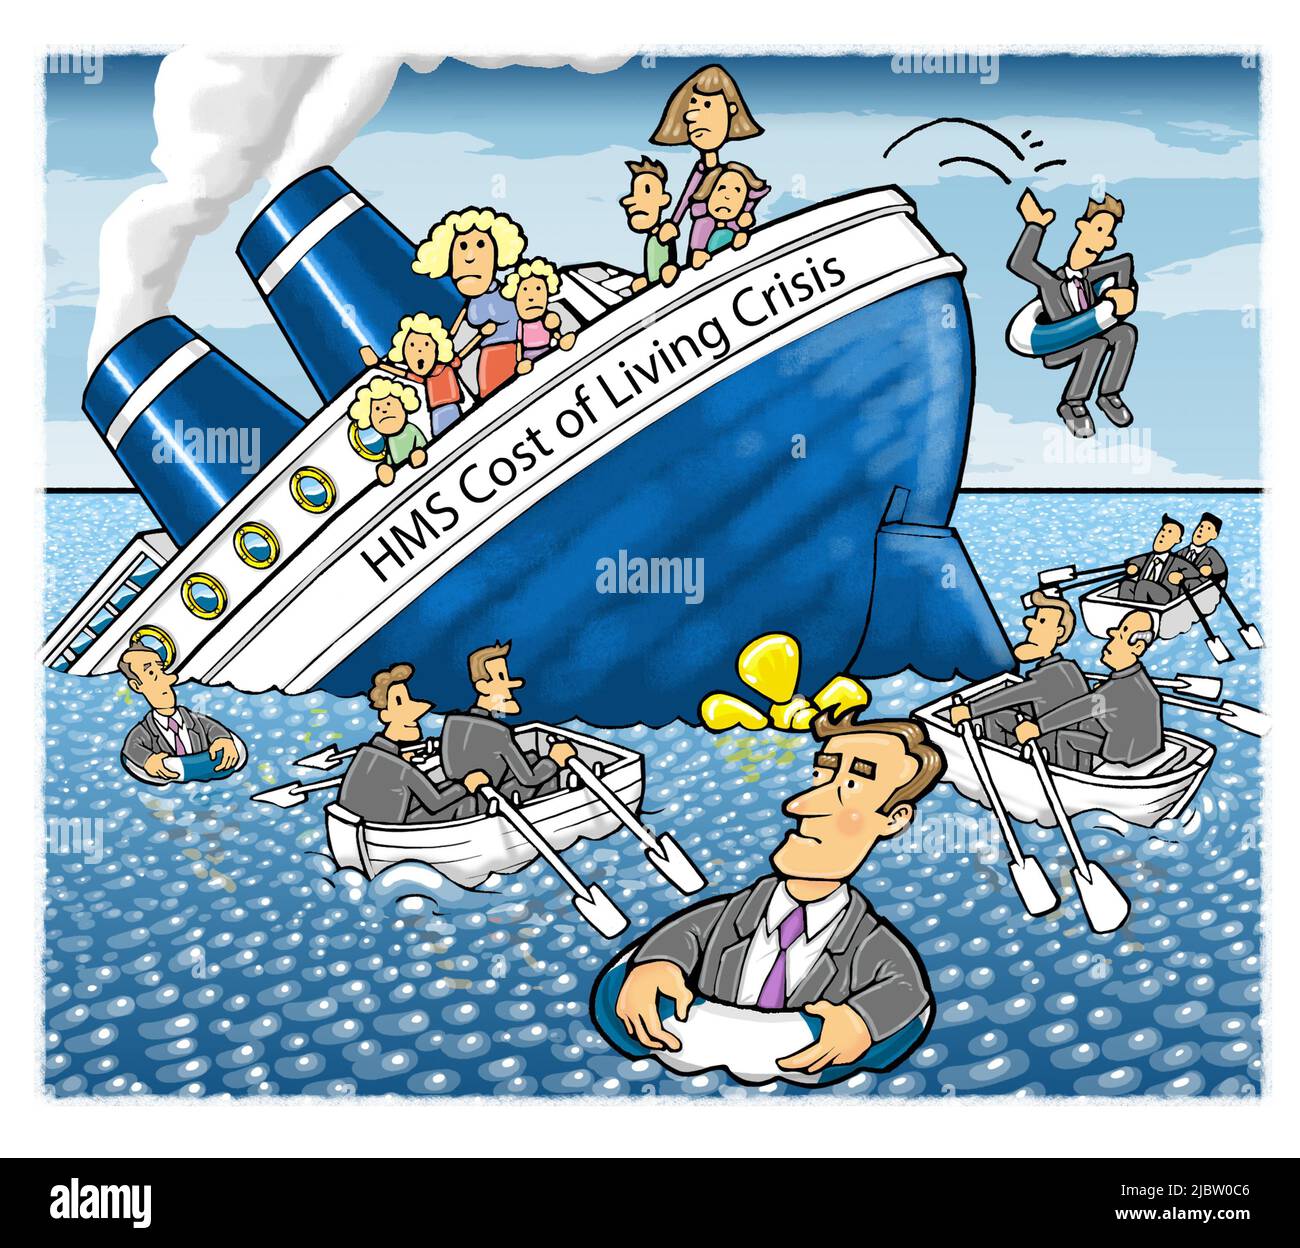 Cartoon art: cost of living crisis, families stranded on a sinking ship, men in suits, representing big business and banks, leaving the sinking ship. Stock Photo